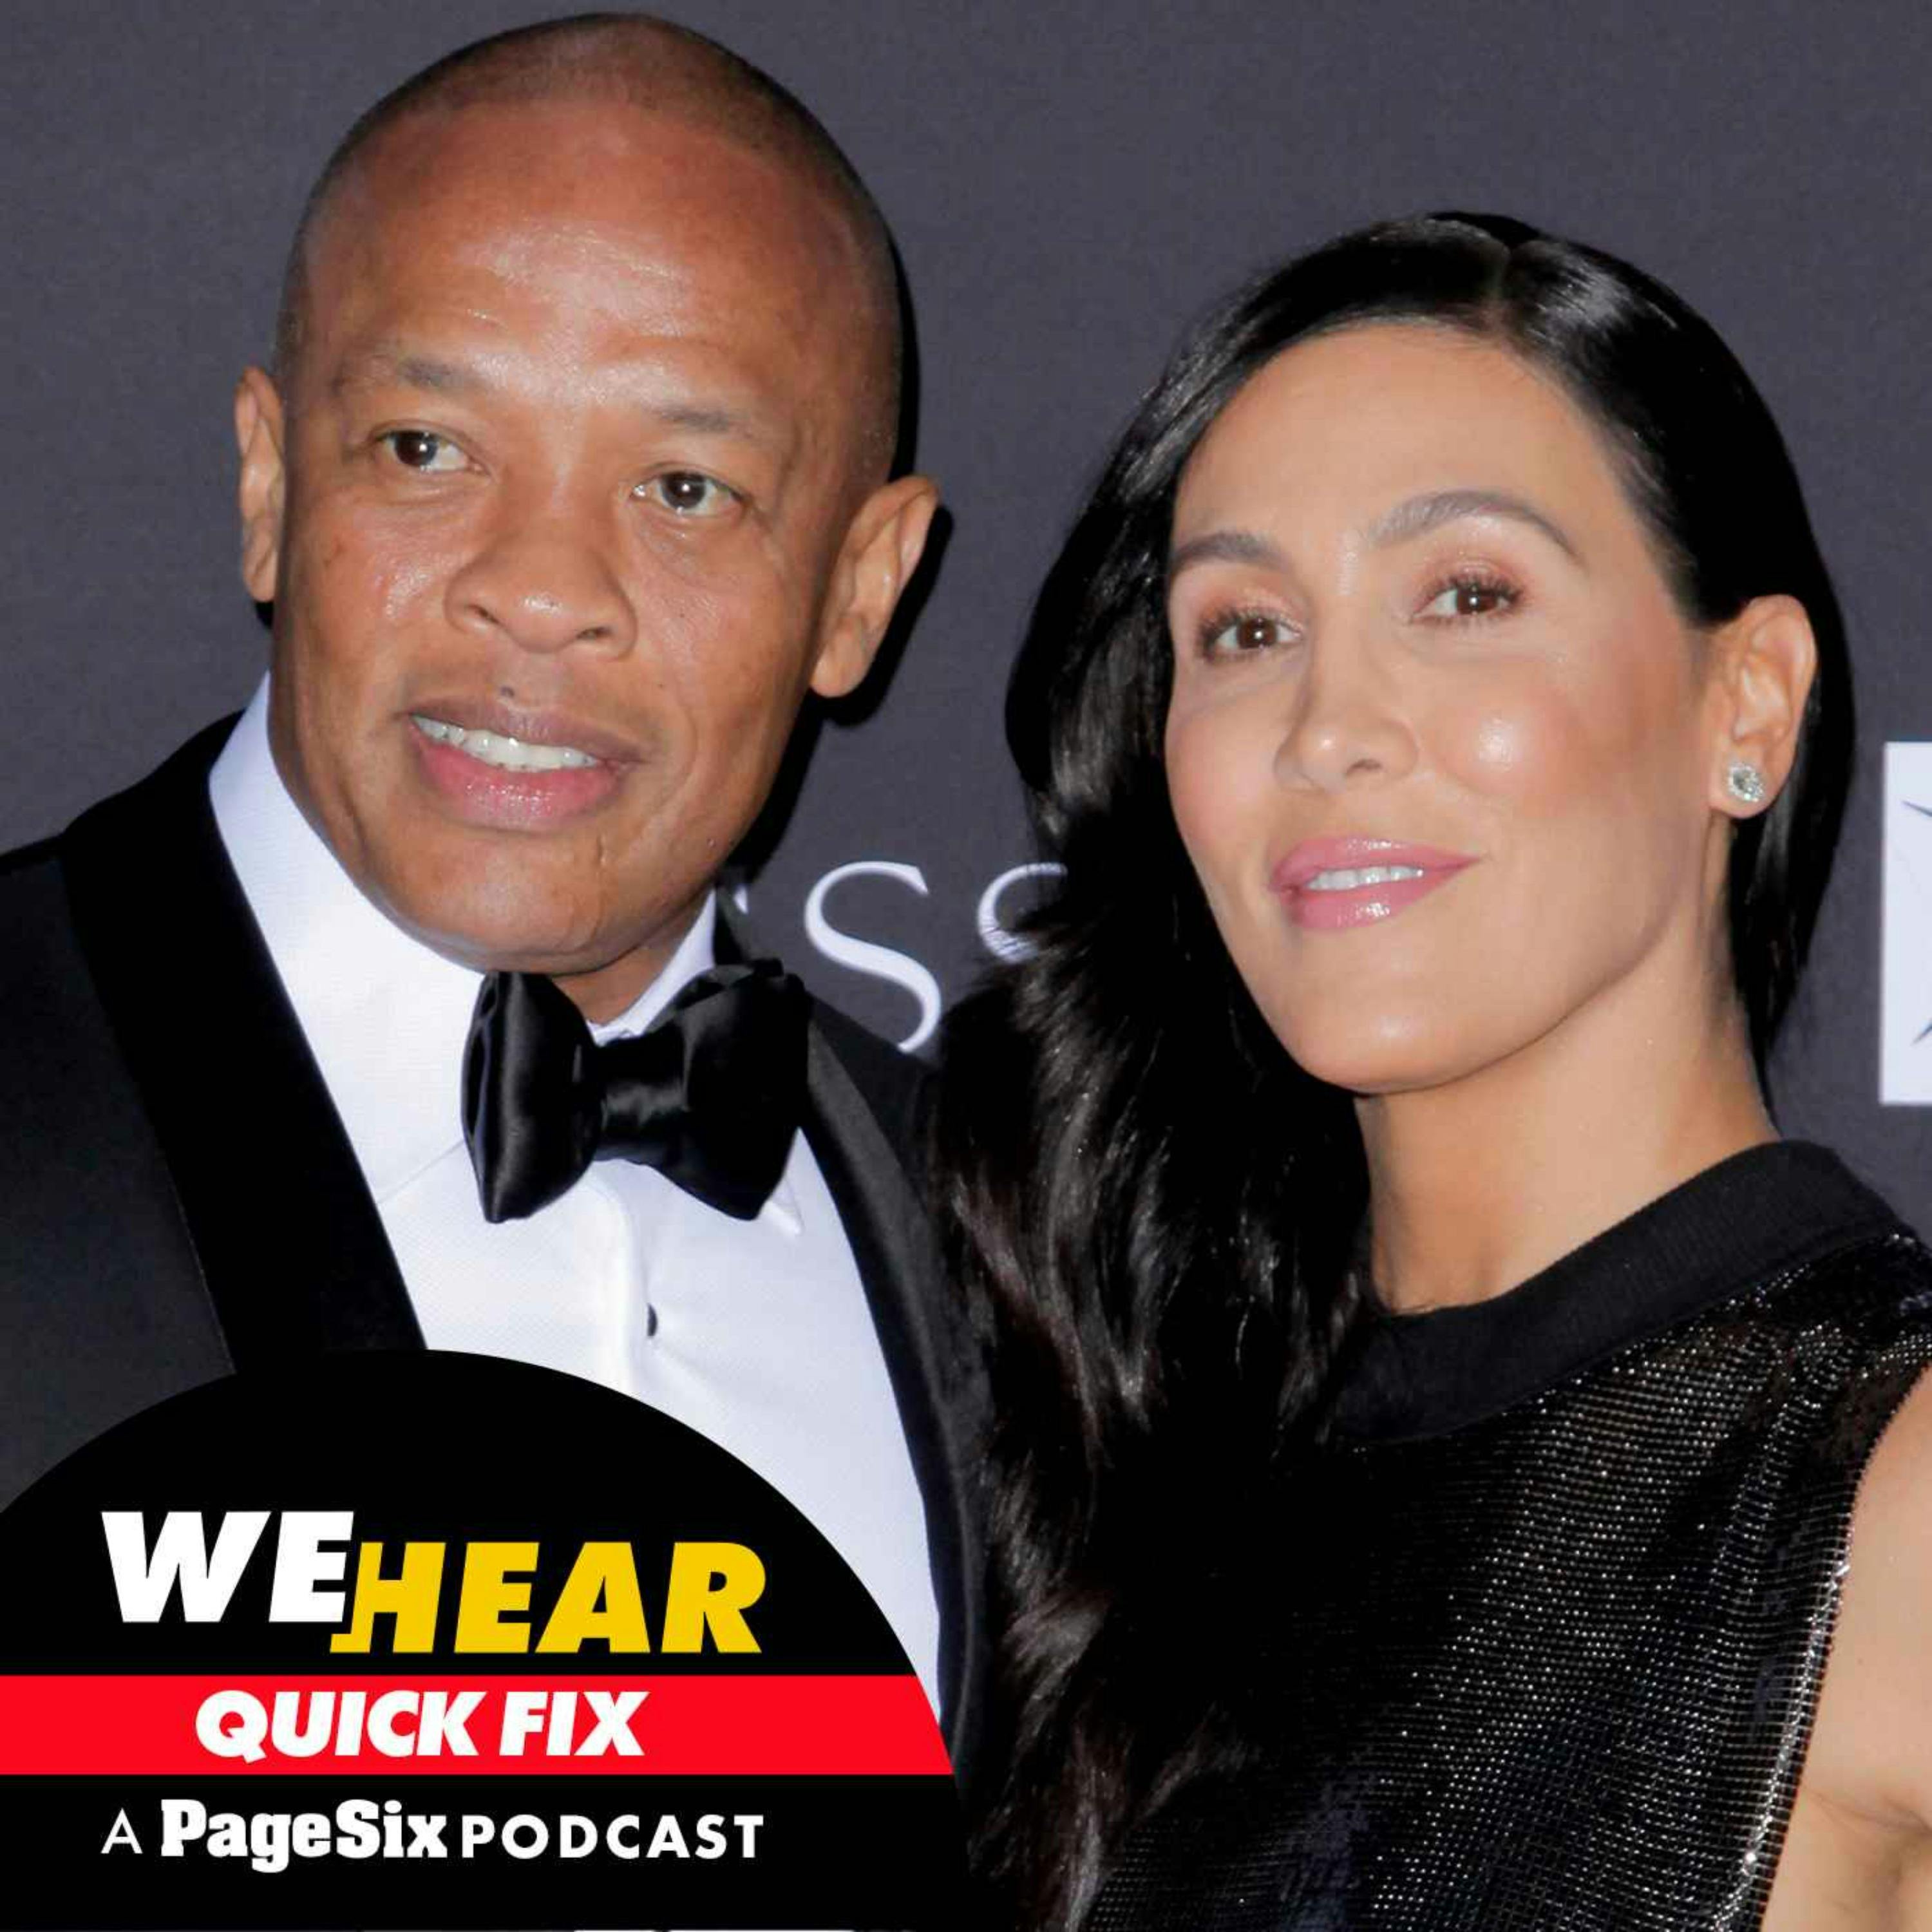 Dr. Dre will pay Nicole Young millions in divorce settlement, more